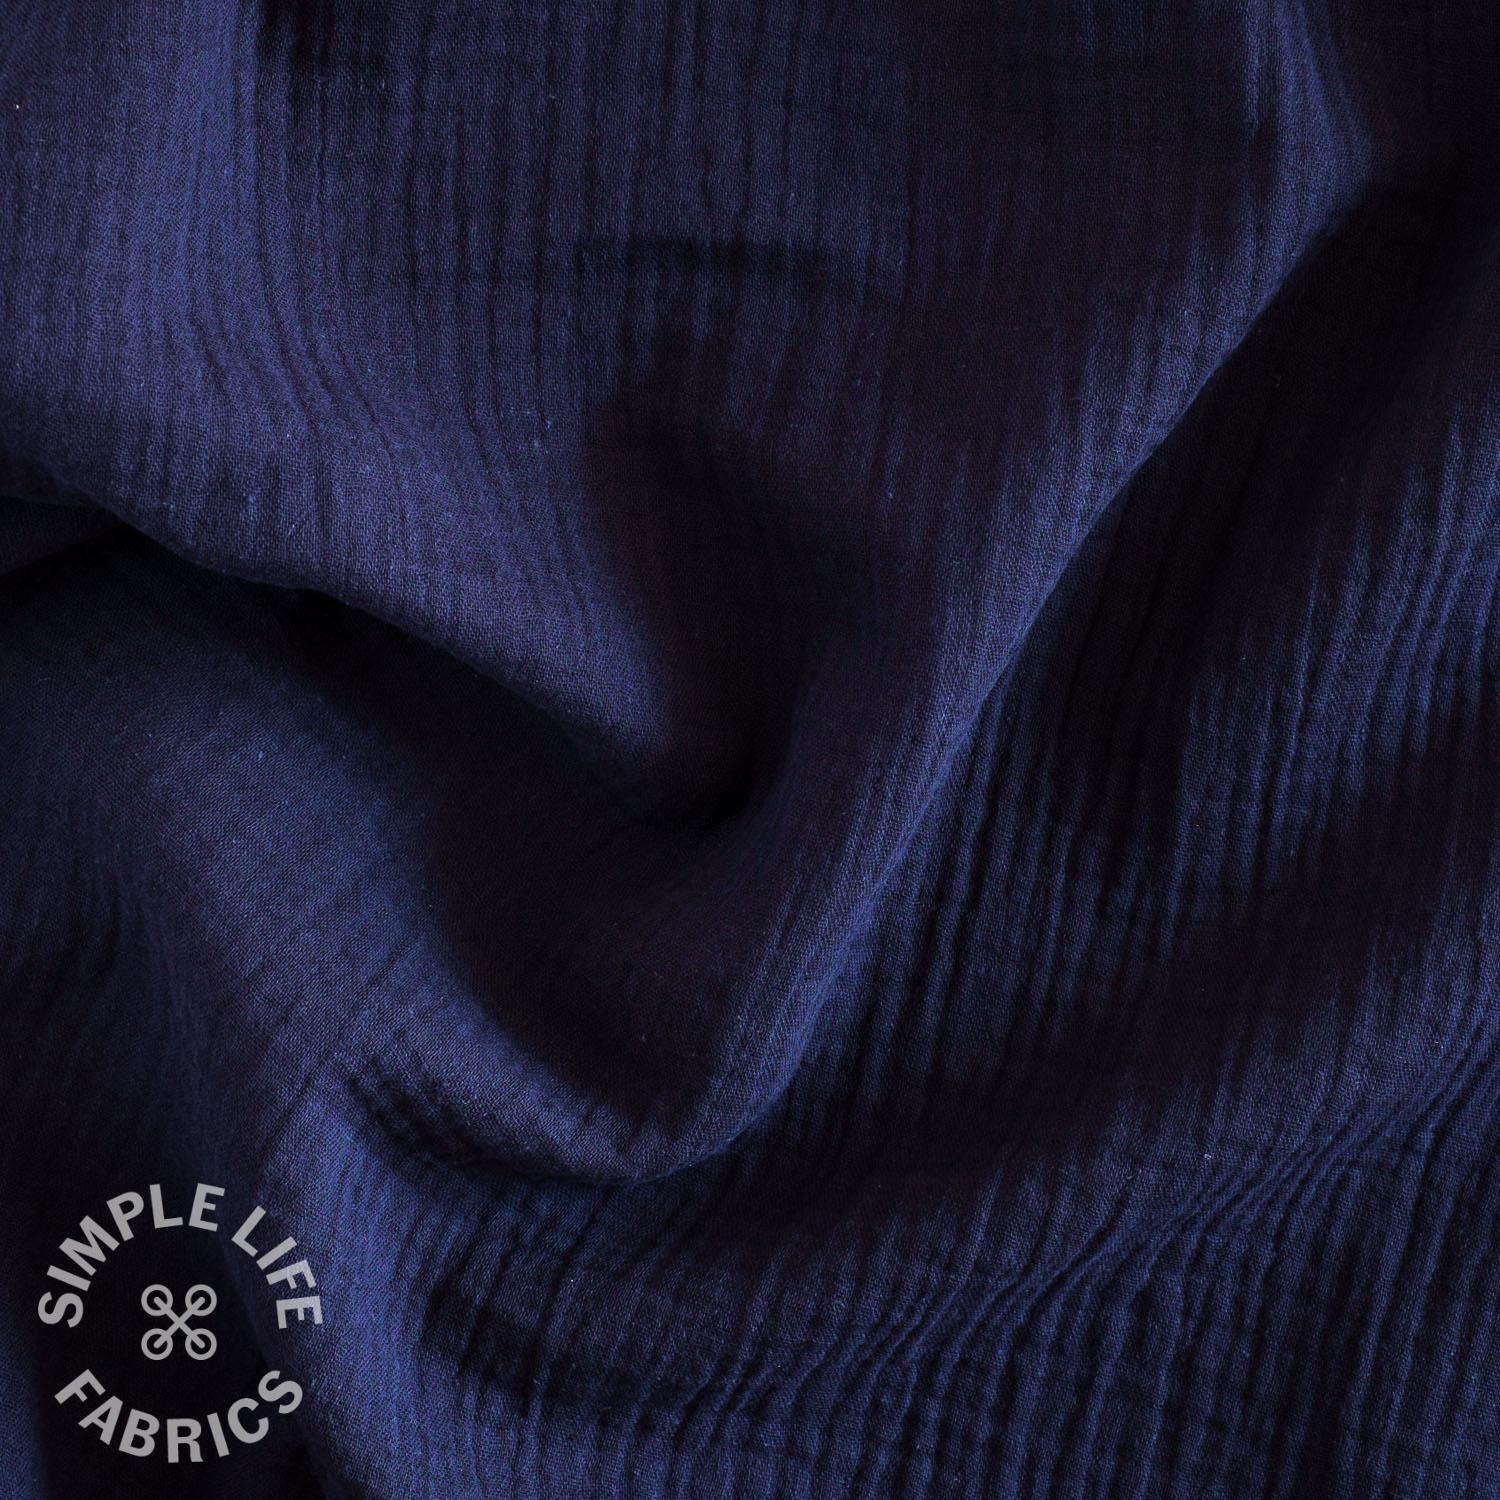 Navy blue solid colour organic double gauze fabric